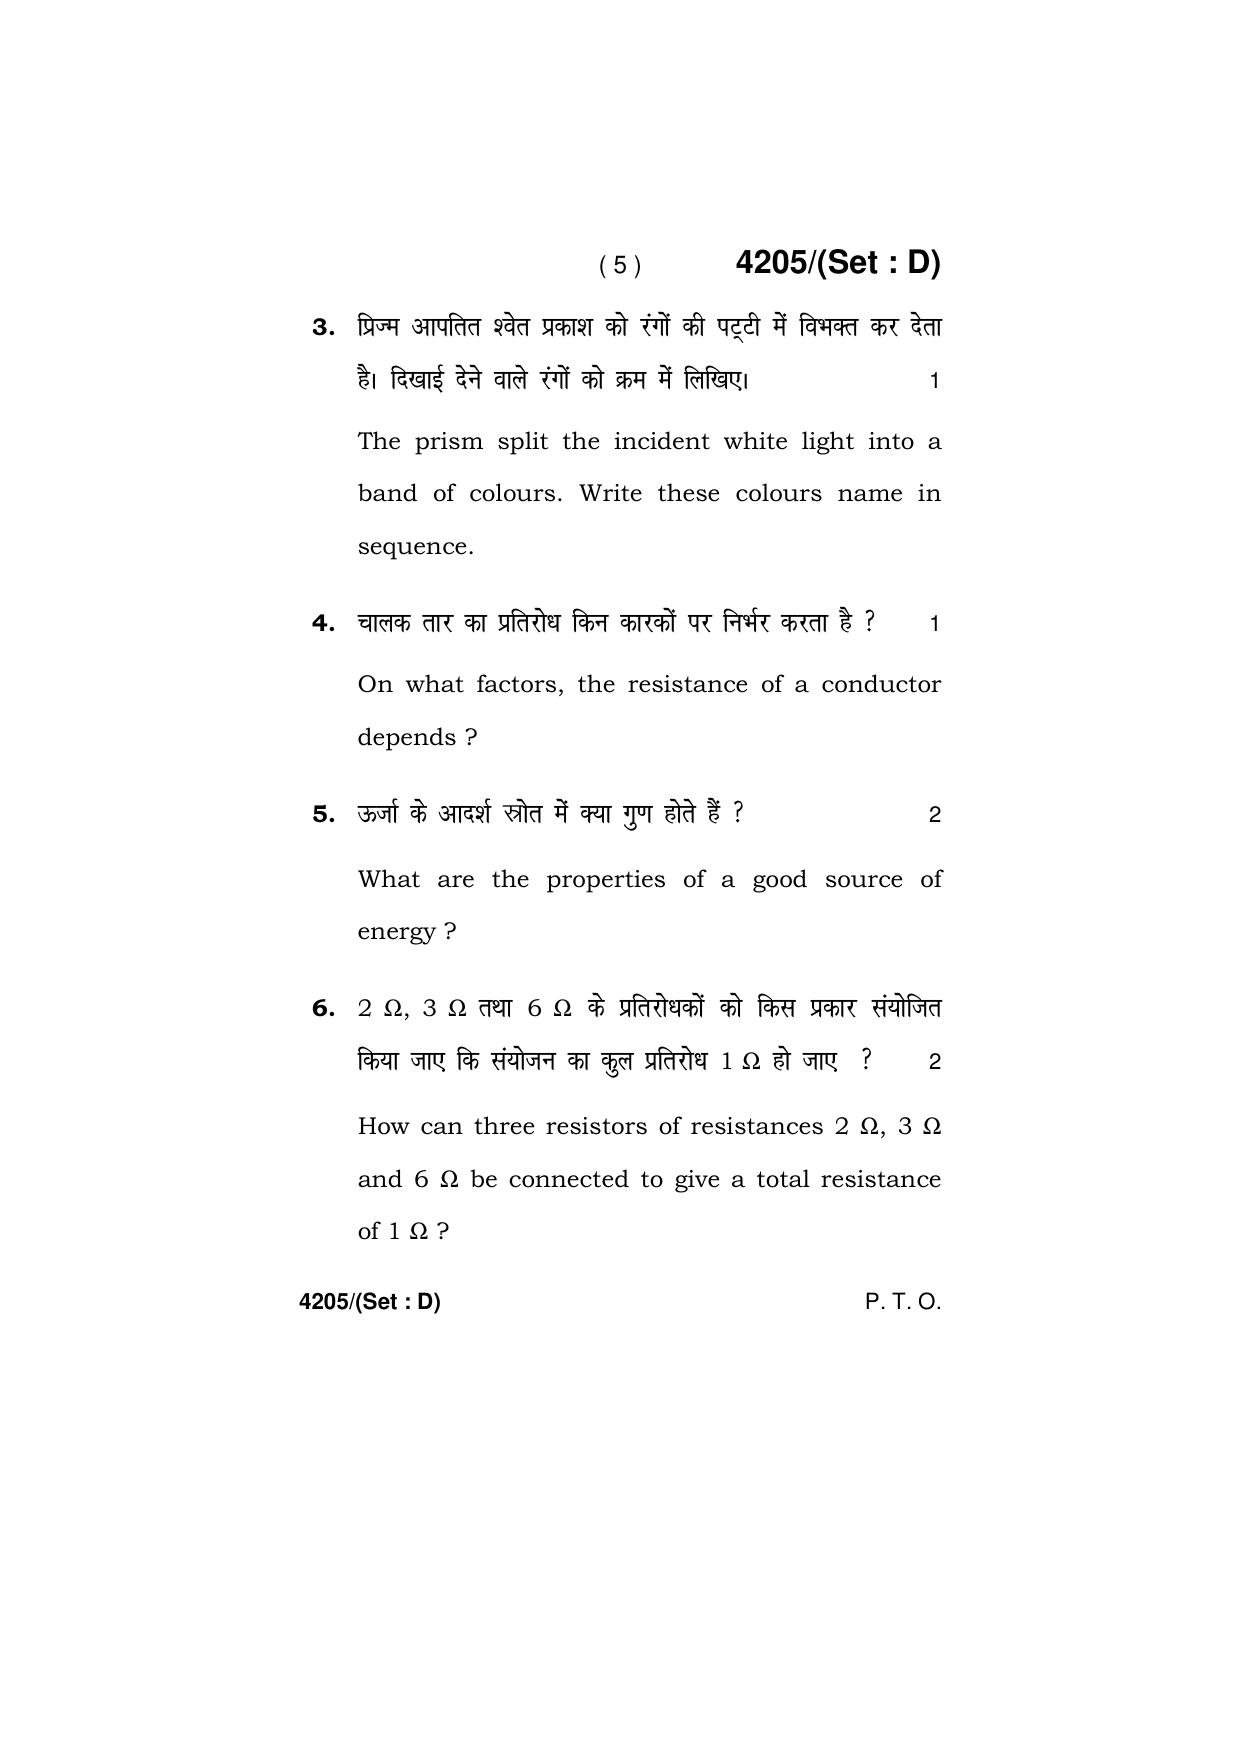 Haryana Board HBSE Class 10 Science (All Set) 2019 Question Paper - Page 53